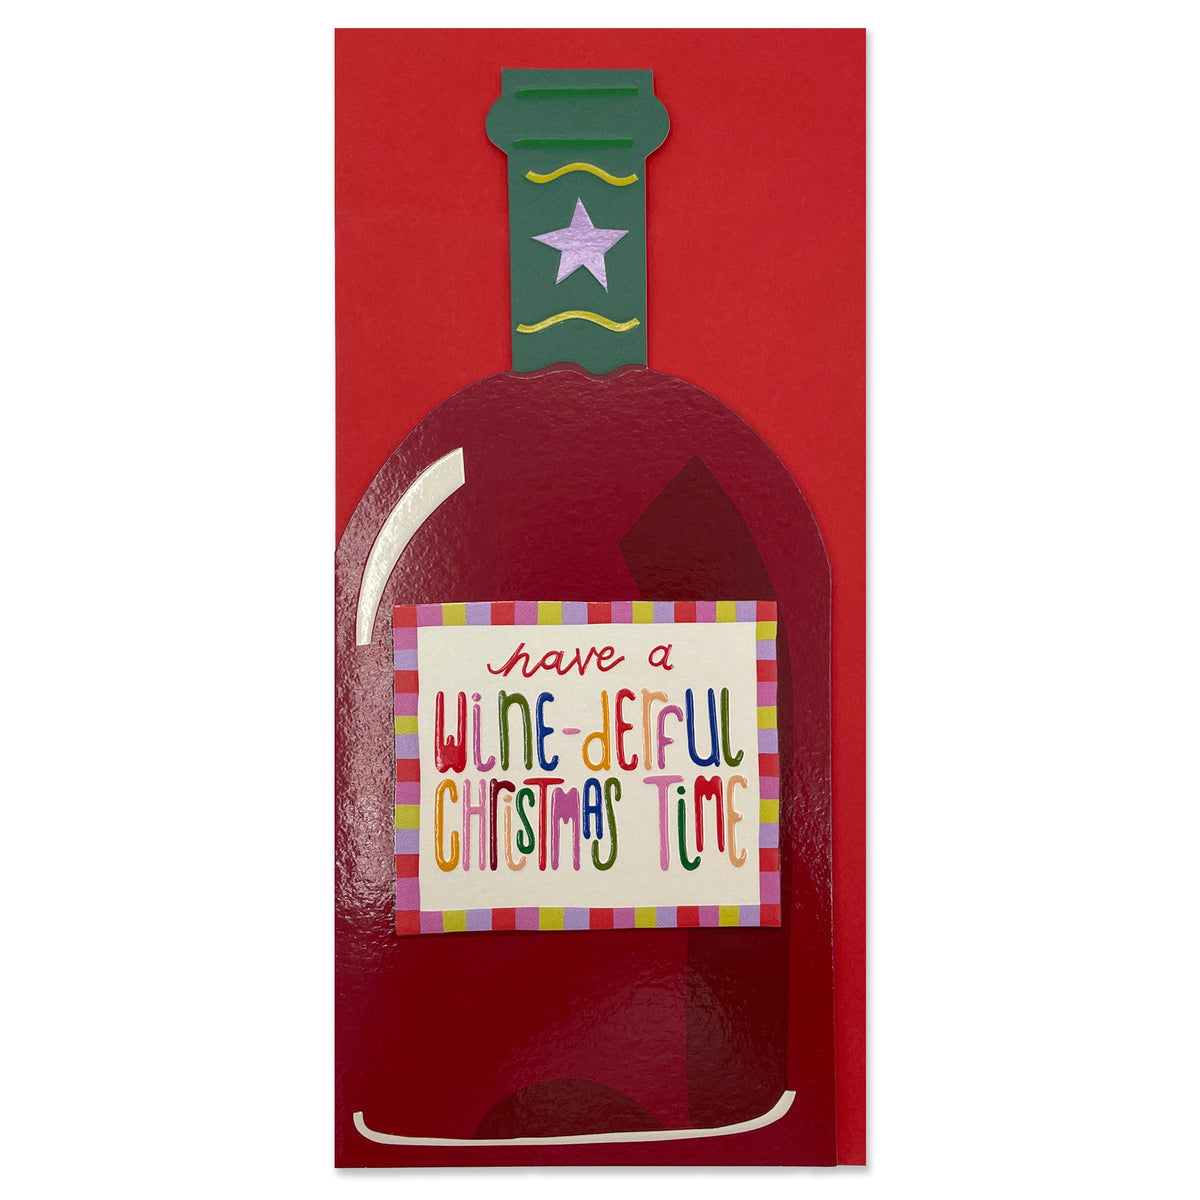 A christmas card in the shape of a red wine bottle featuring a label with the words &#39; have a wine-derful christmas time&#39;.